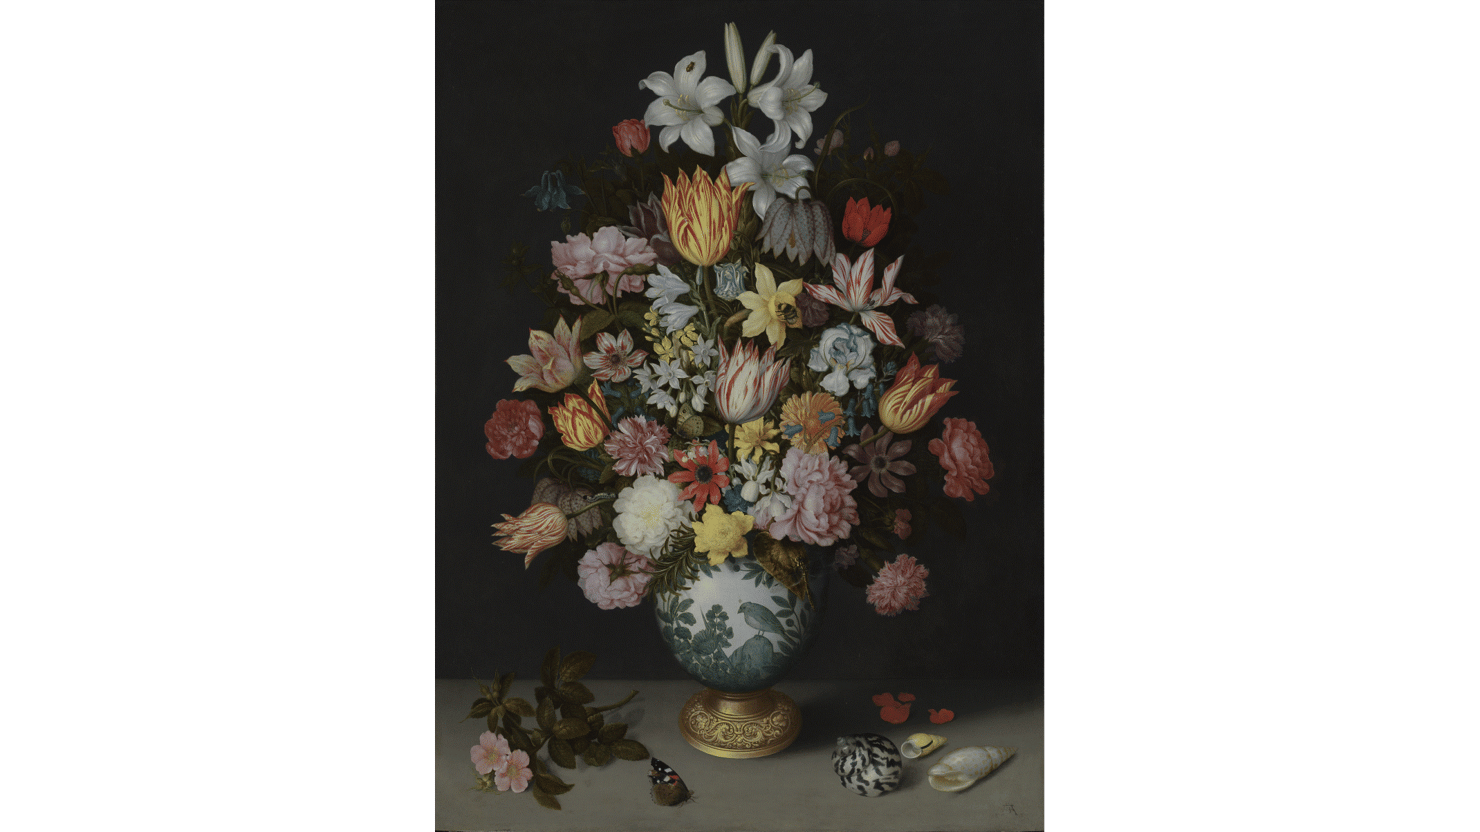 Balthasar van der Ast, 1593/94-1657 Flowers in a Vase with Shells and Insects, about 1630 © The National Gallery, London